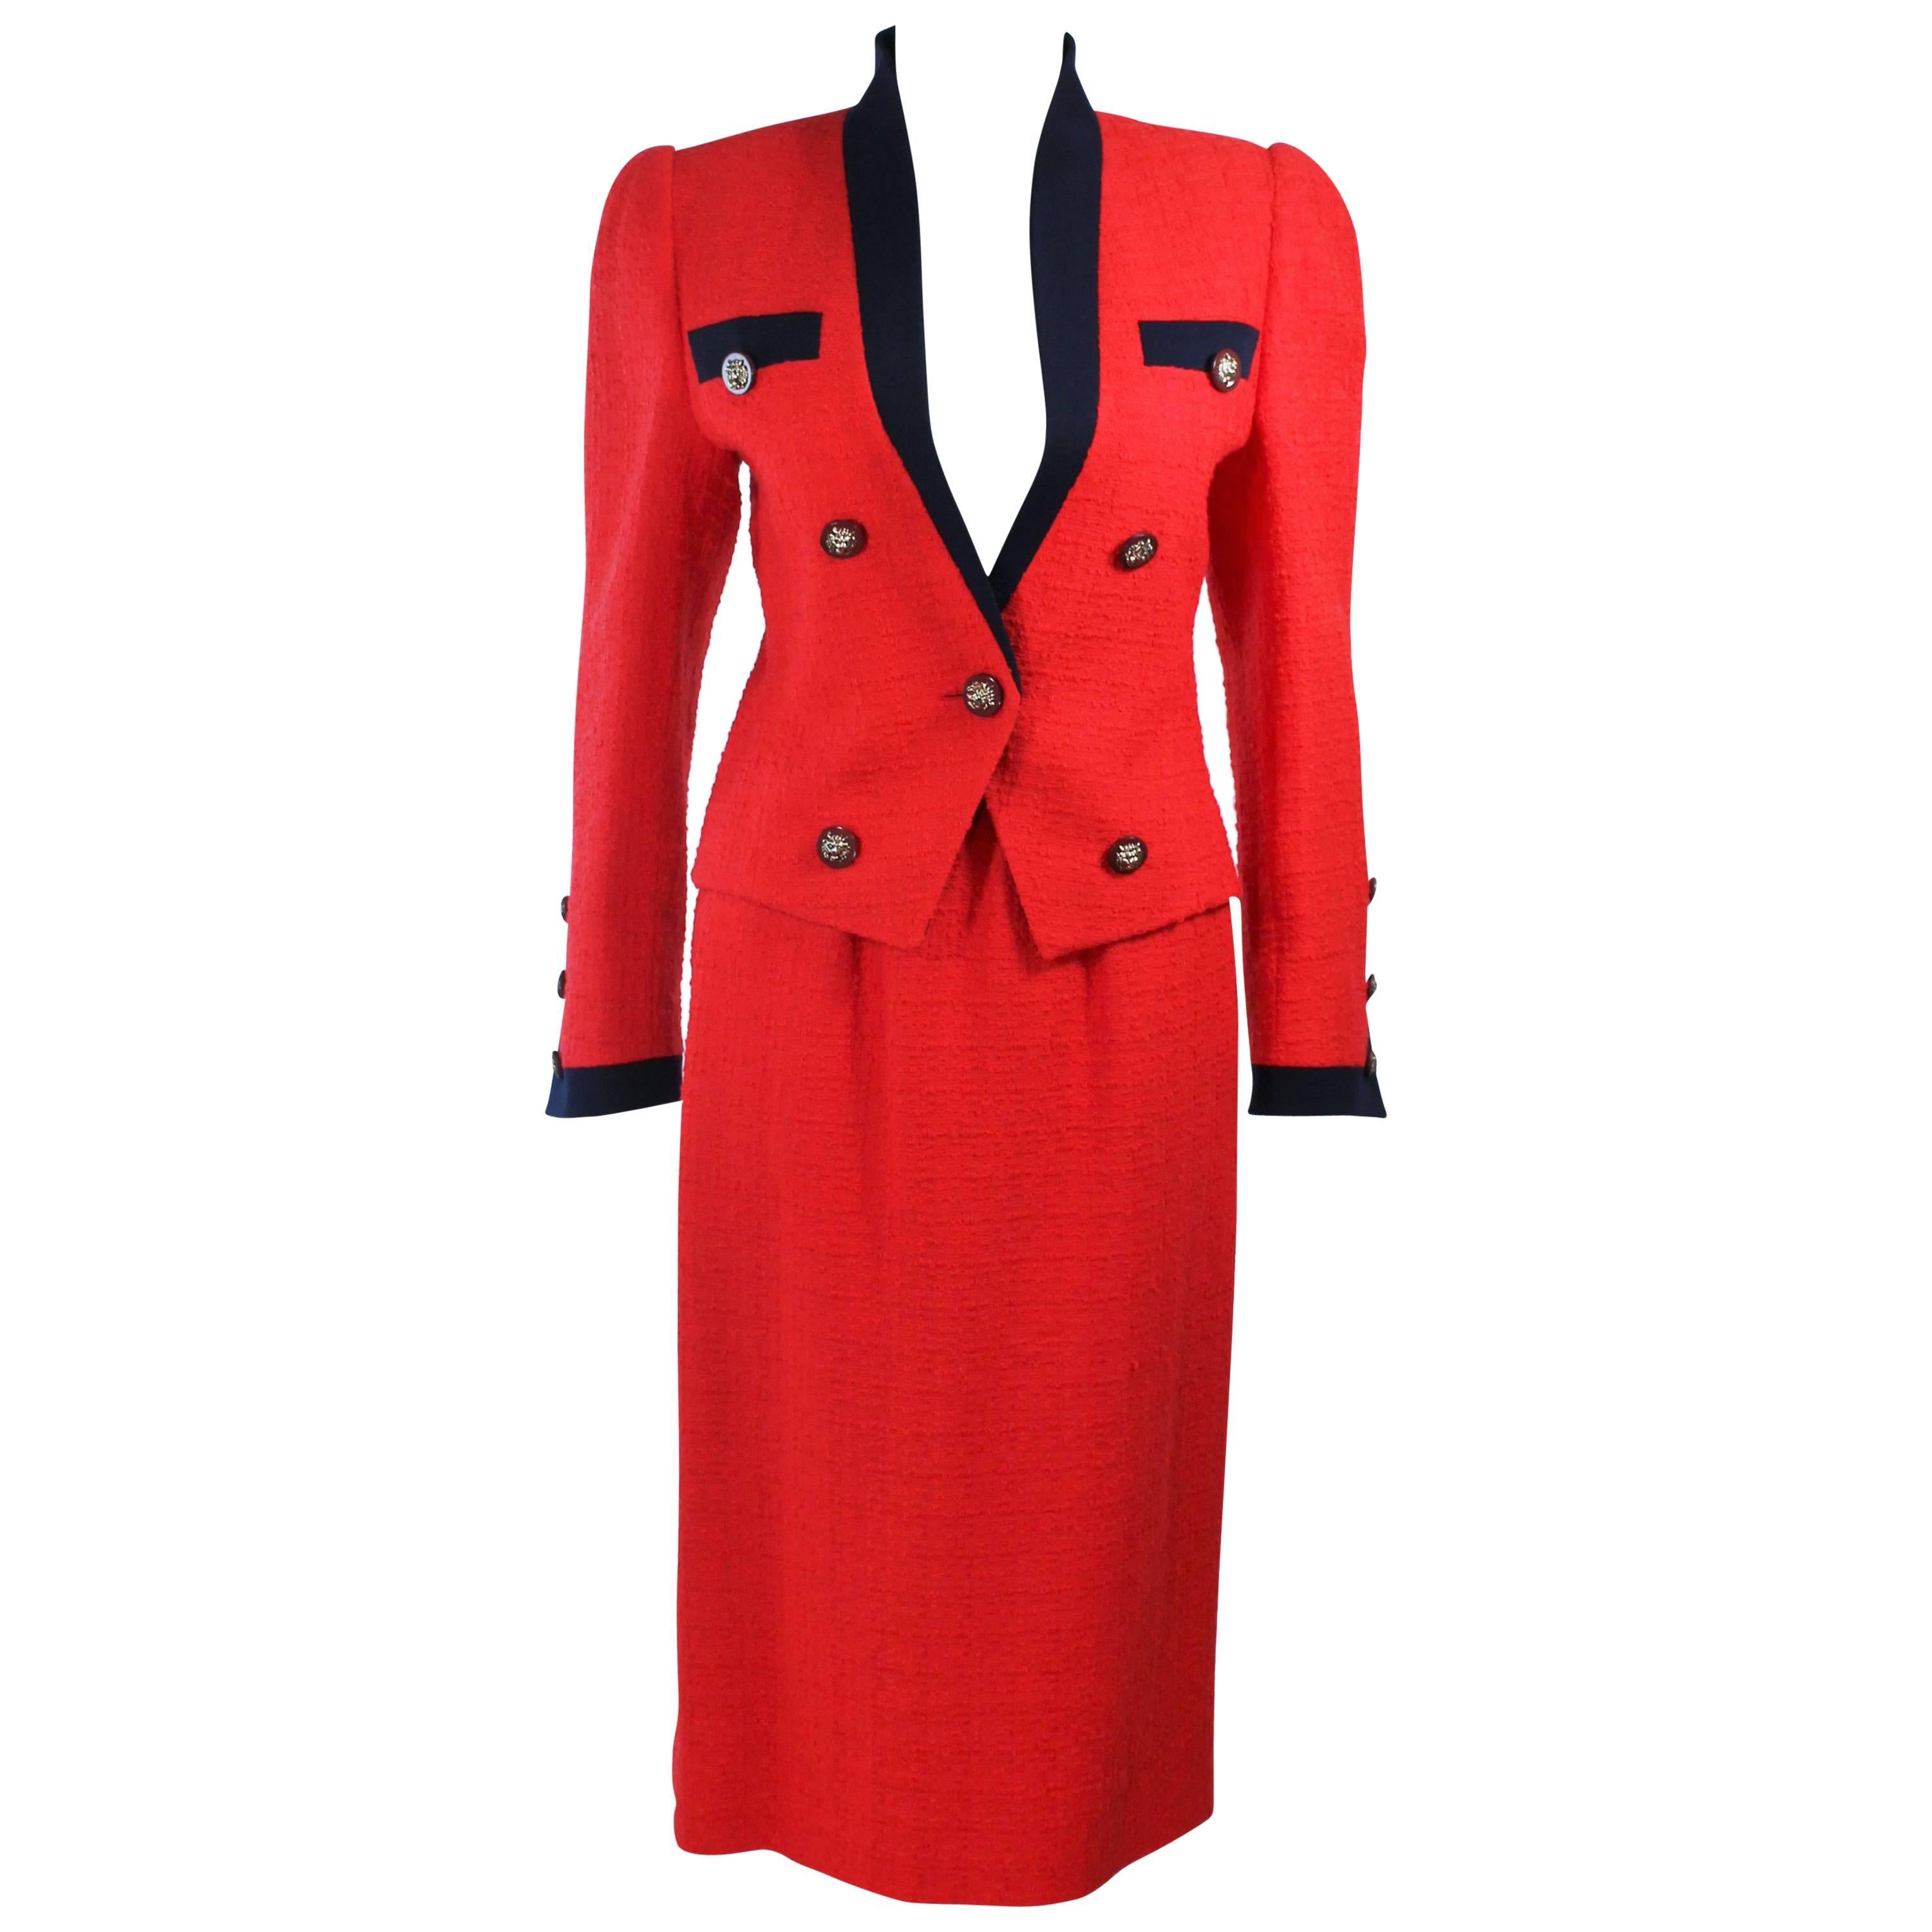 AKRIS "The Butler" JANE FONDA Red and Black Contrast Boucle Suit Size 4  For Sale